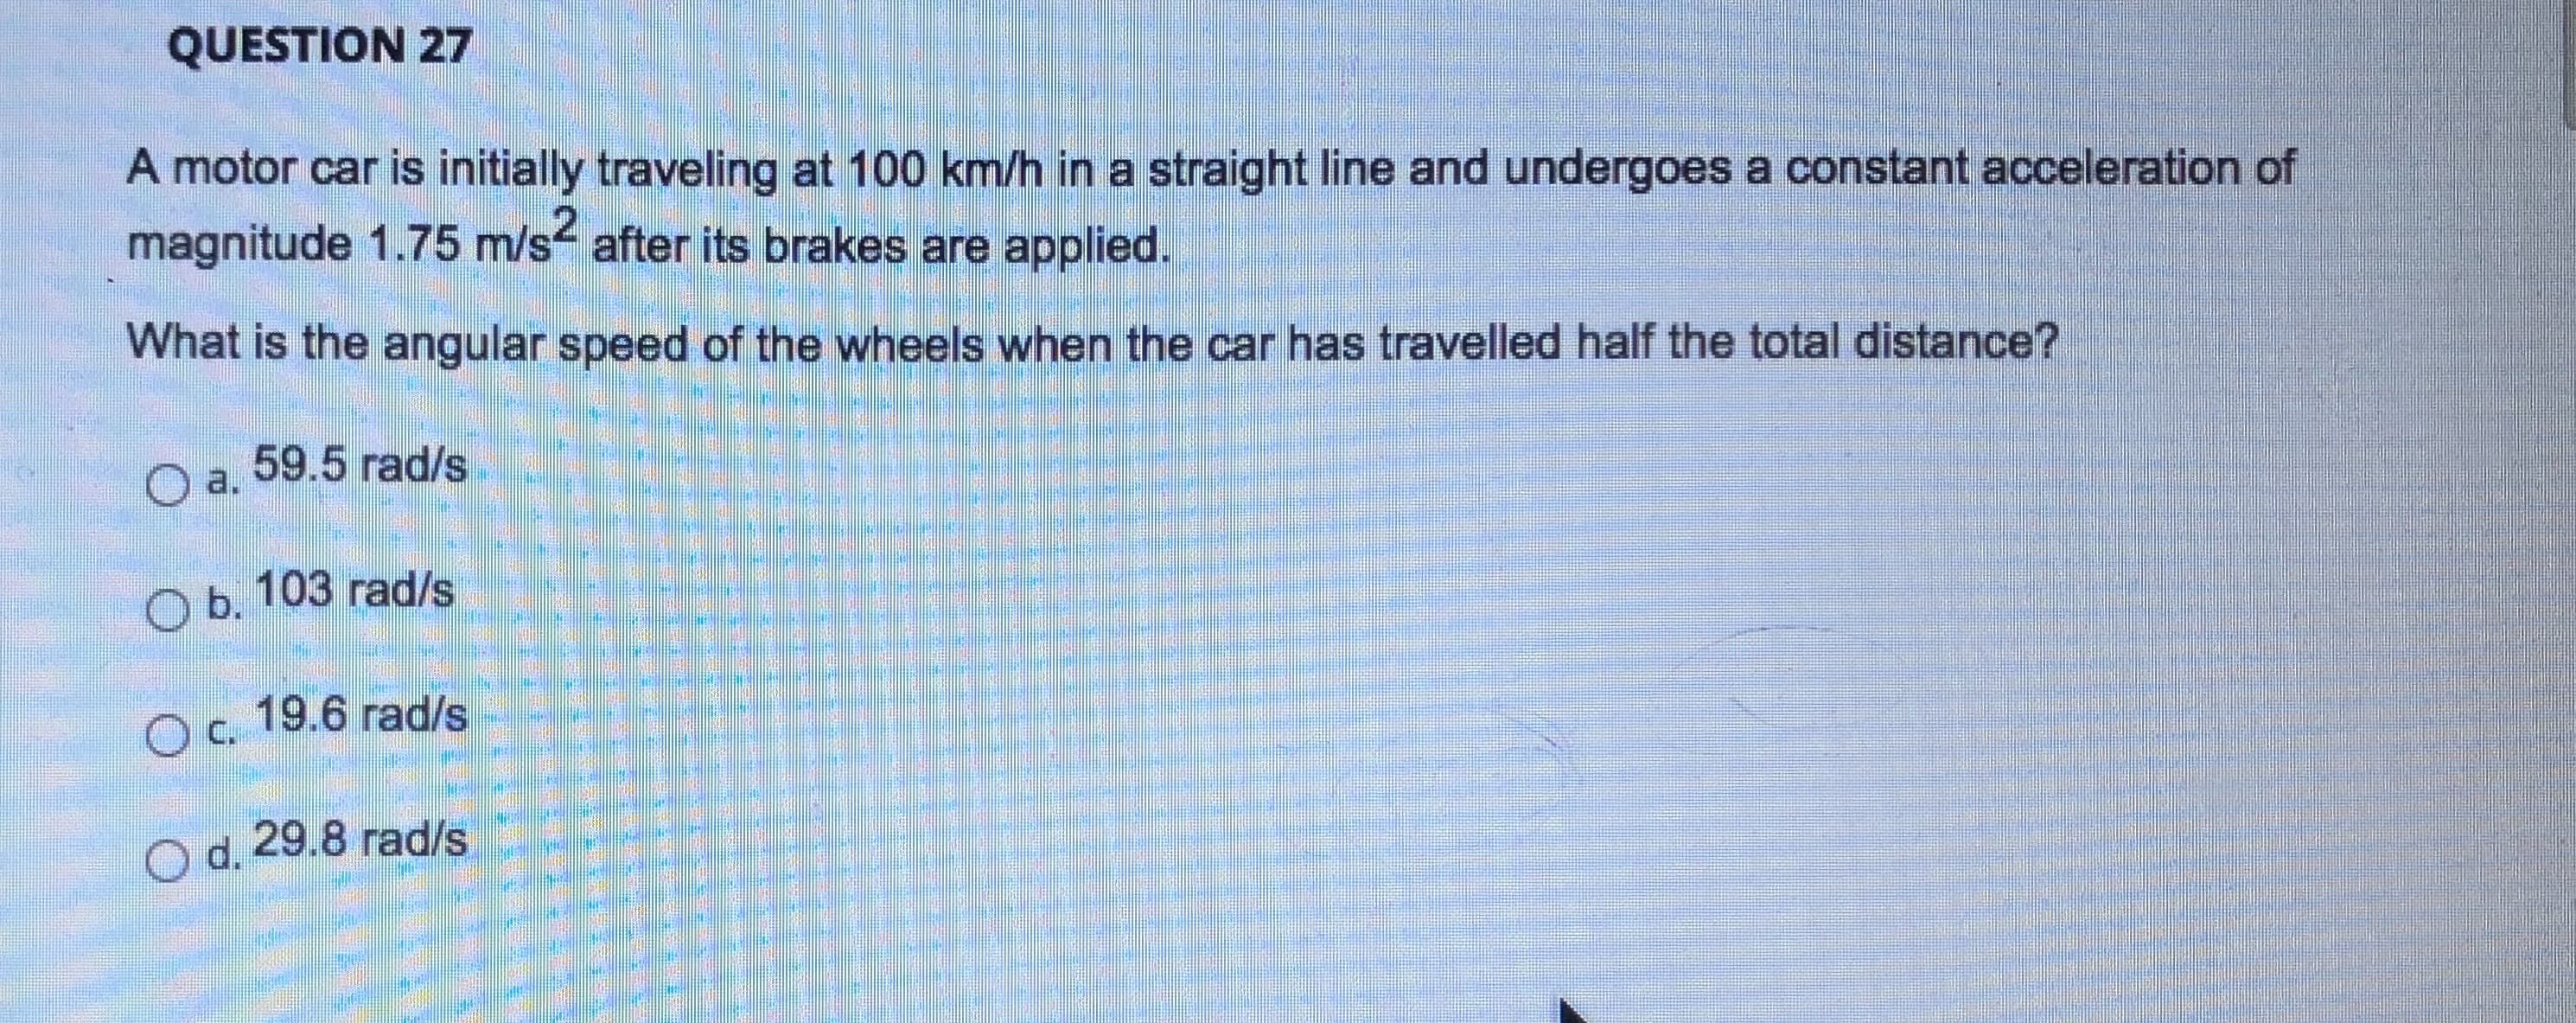 A motor car is initially traveling at 100 km/h in a straight line and undergoes a constant acceleration of
magnitude 1.75 m/s after its brakes are applied.
.2
What is the angular speed of the wheels when the car has travelled half the total distance?
